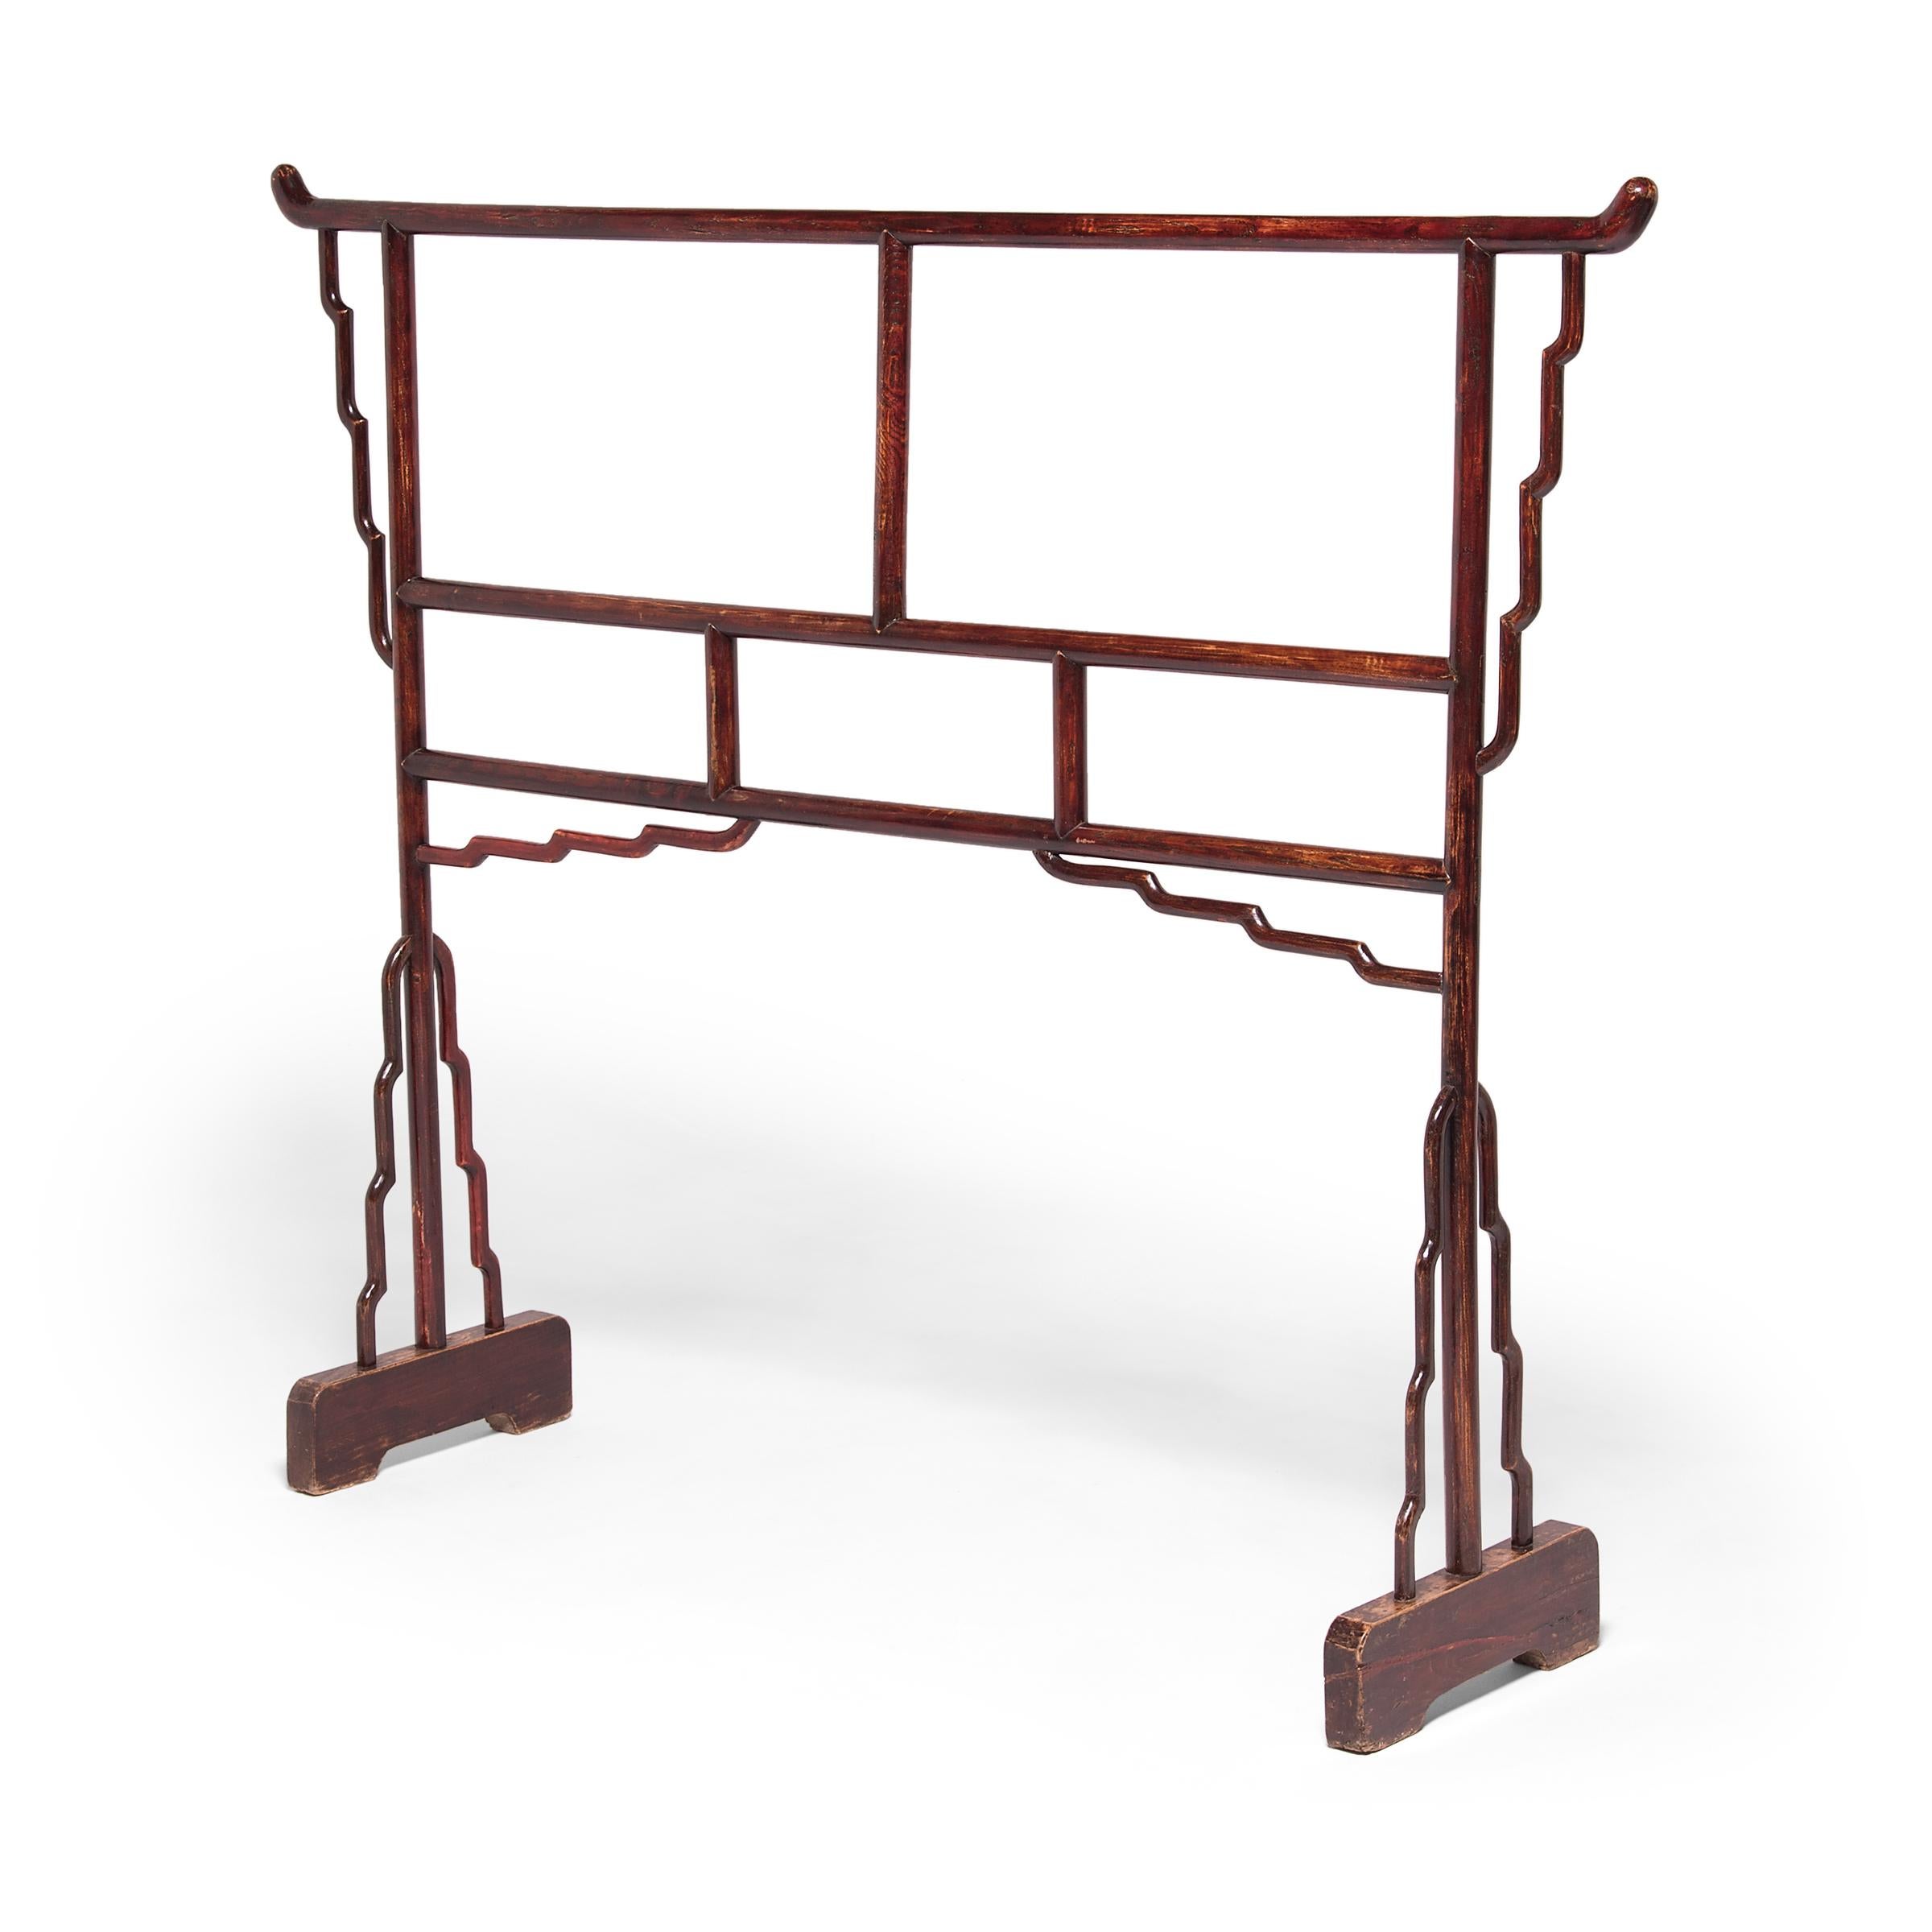 Crafted by an artisan in China's Shanxi province, this mid-19th century elmwood garment rack has a spare, linear design with large open areas to accommodate folded textiles. Since conventional Qing-dynasty homes did not contain any closets,